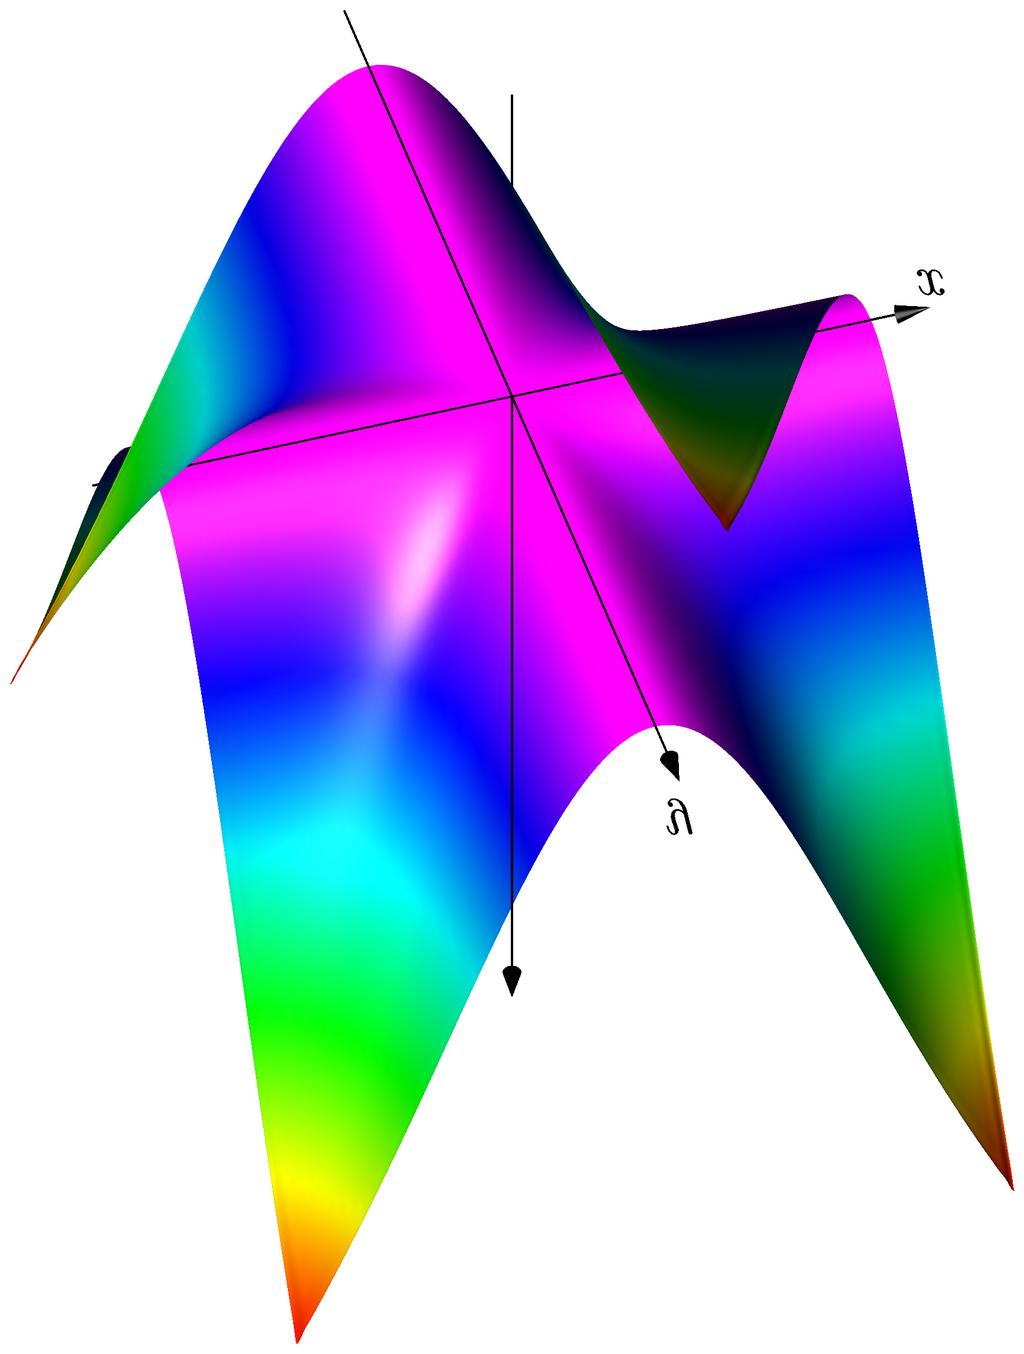 (b) The graph and a colour density plot of the function f (x, y) from Problem 1(c), over a square centred at the origin.